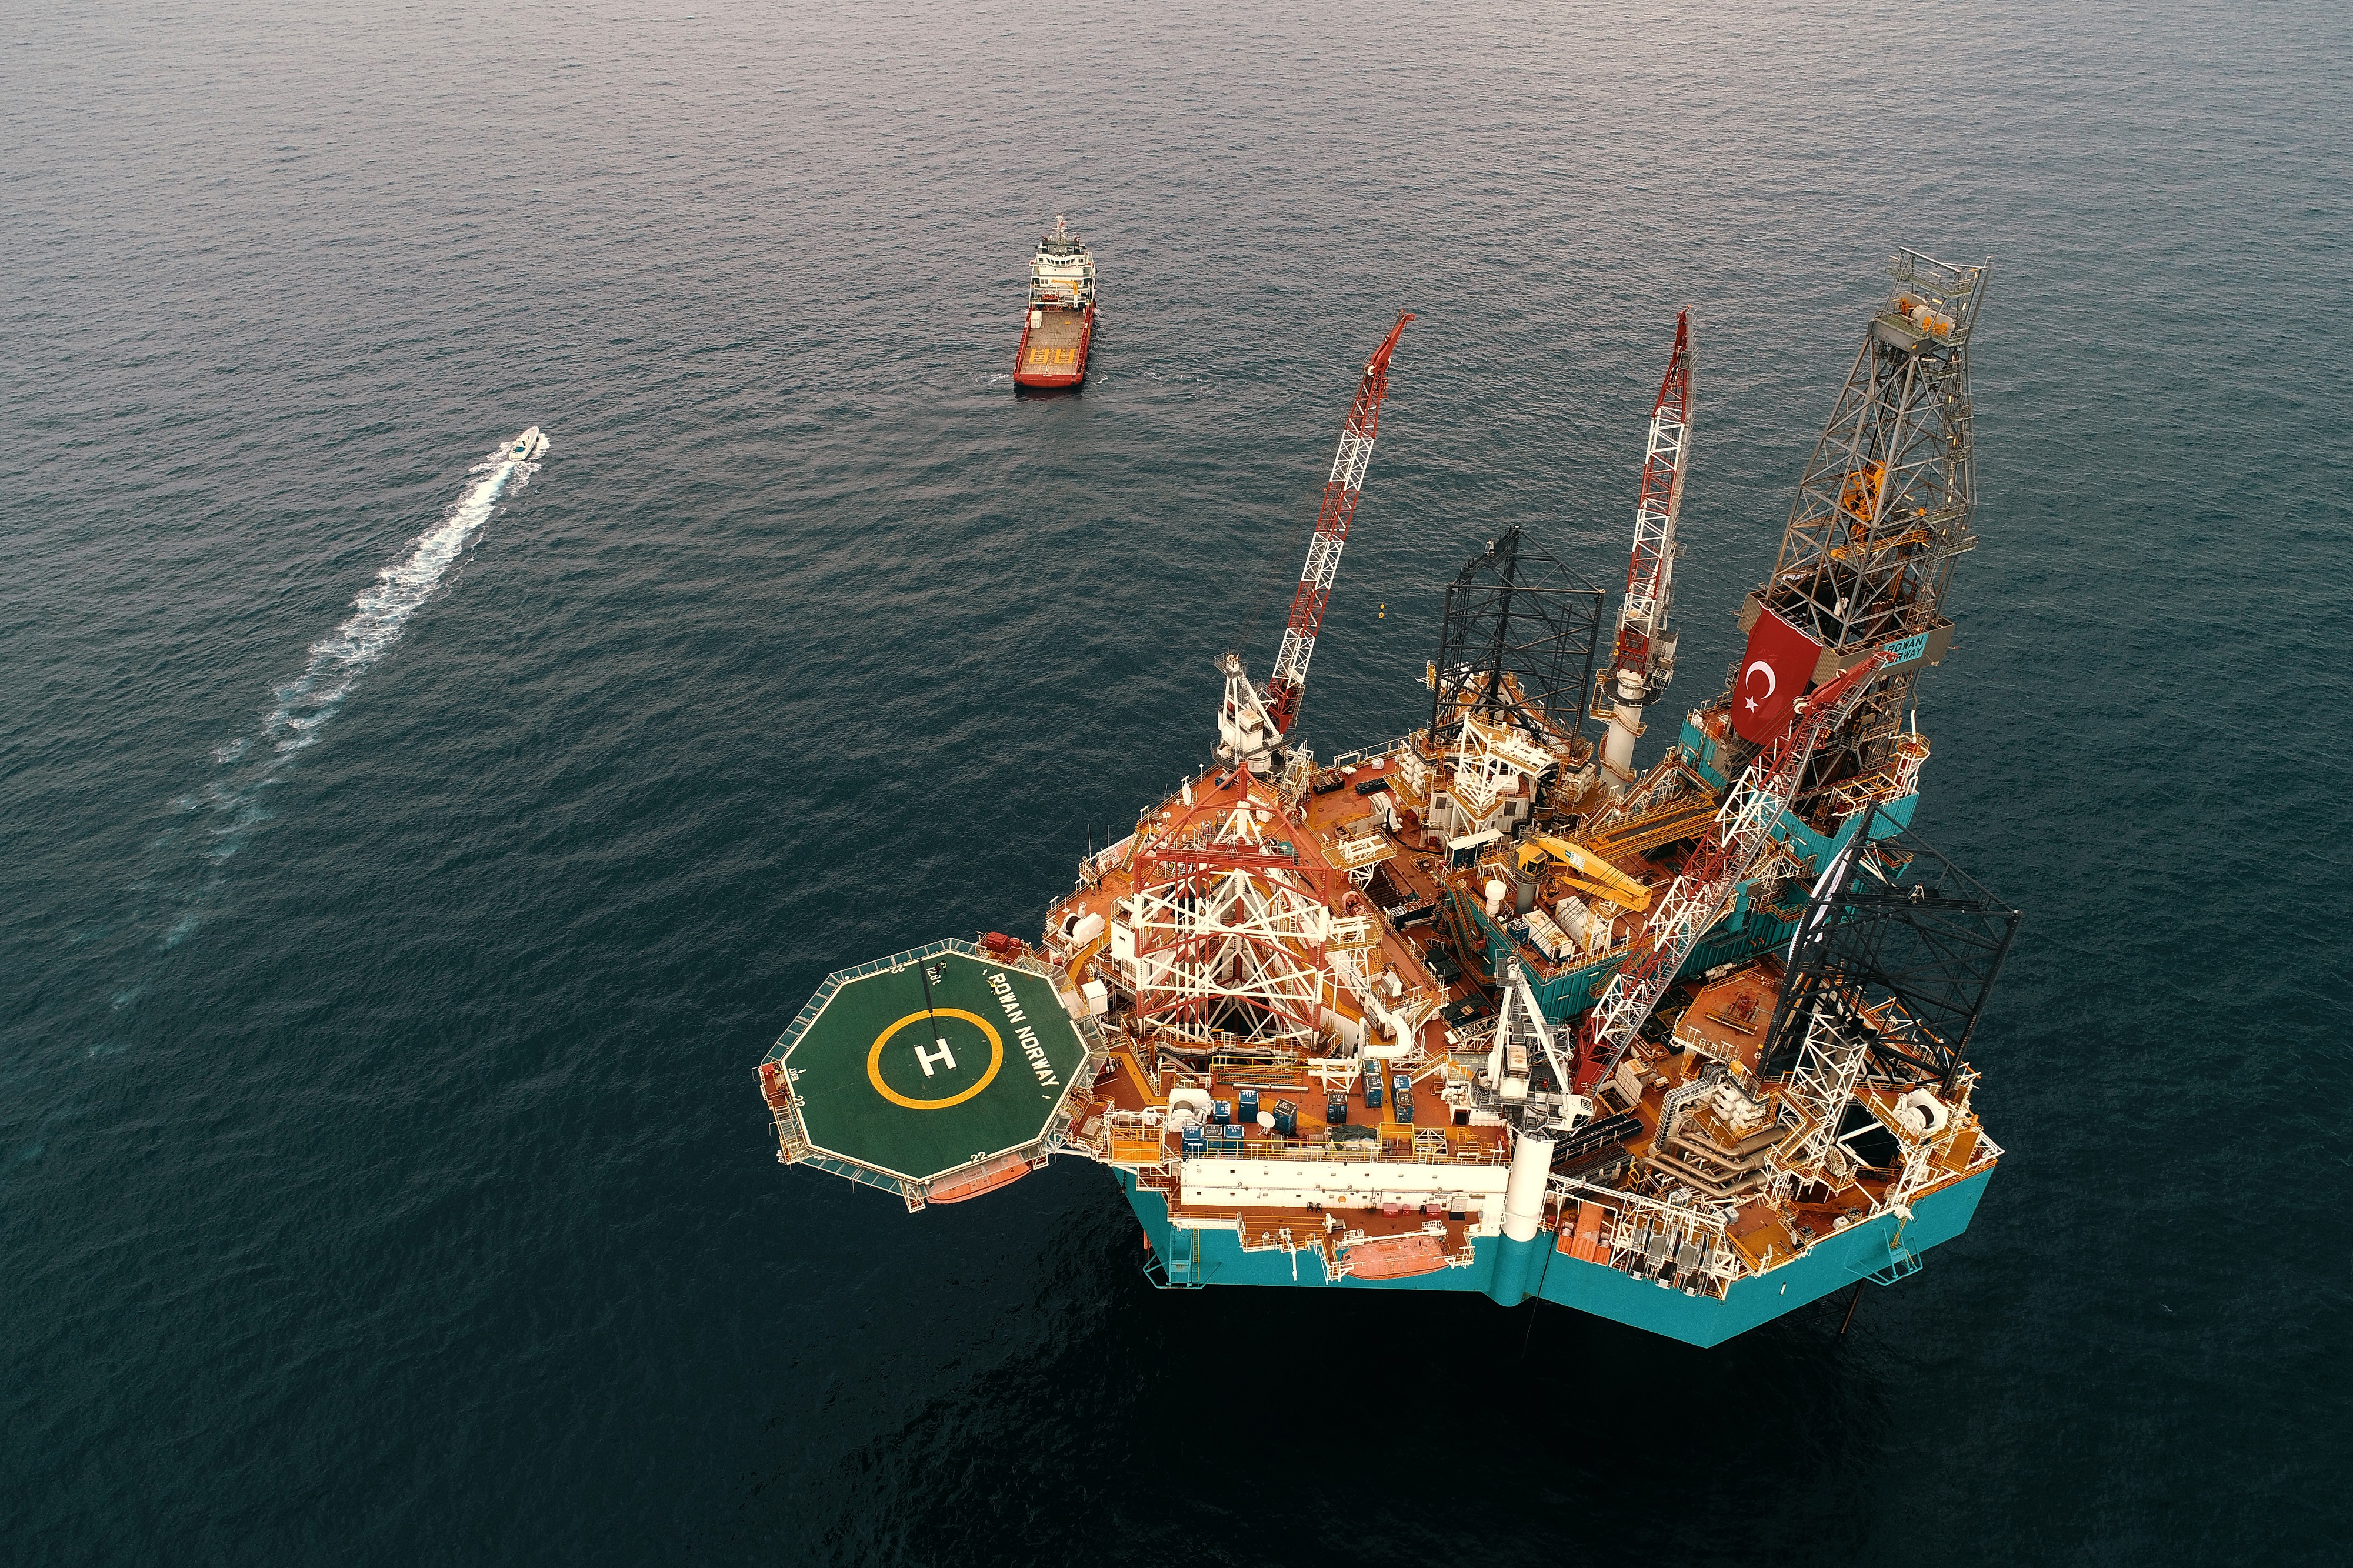 Turkey starts shallow water drilling in Med. Sea